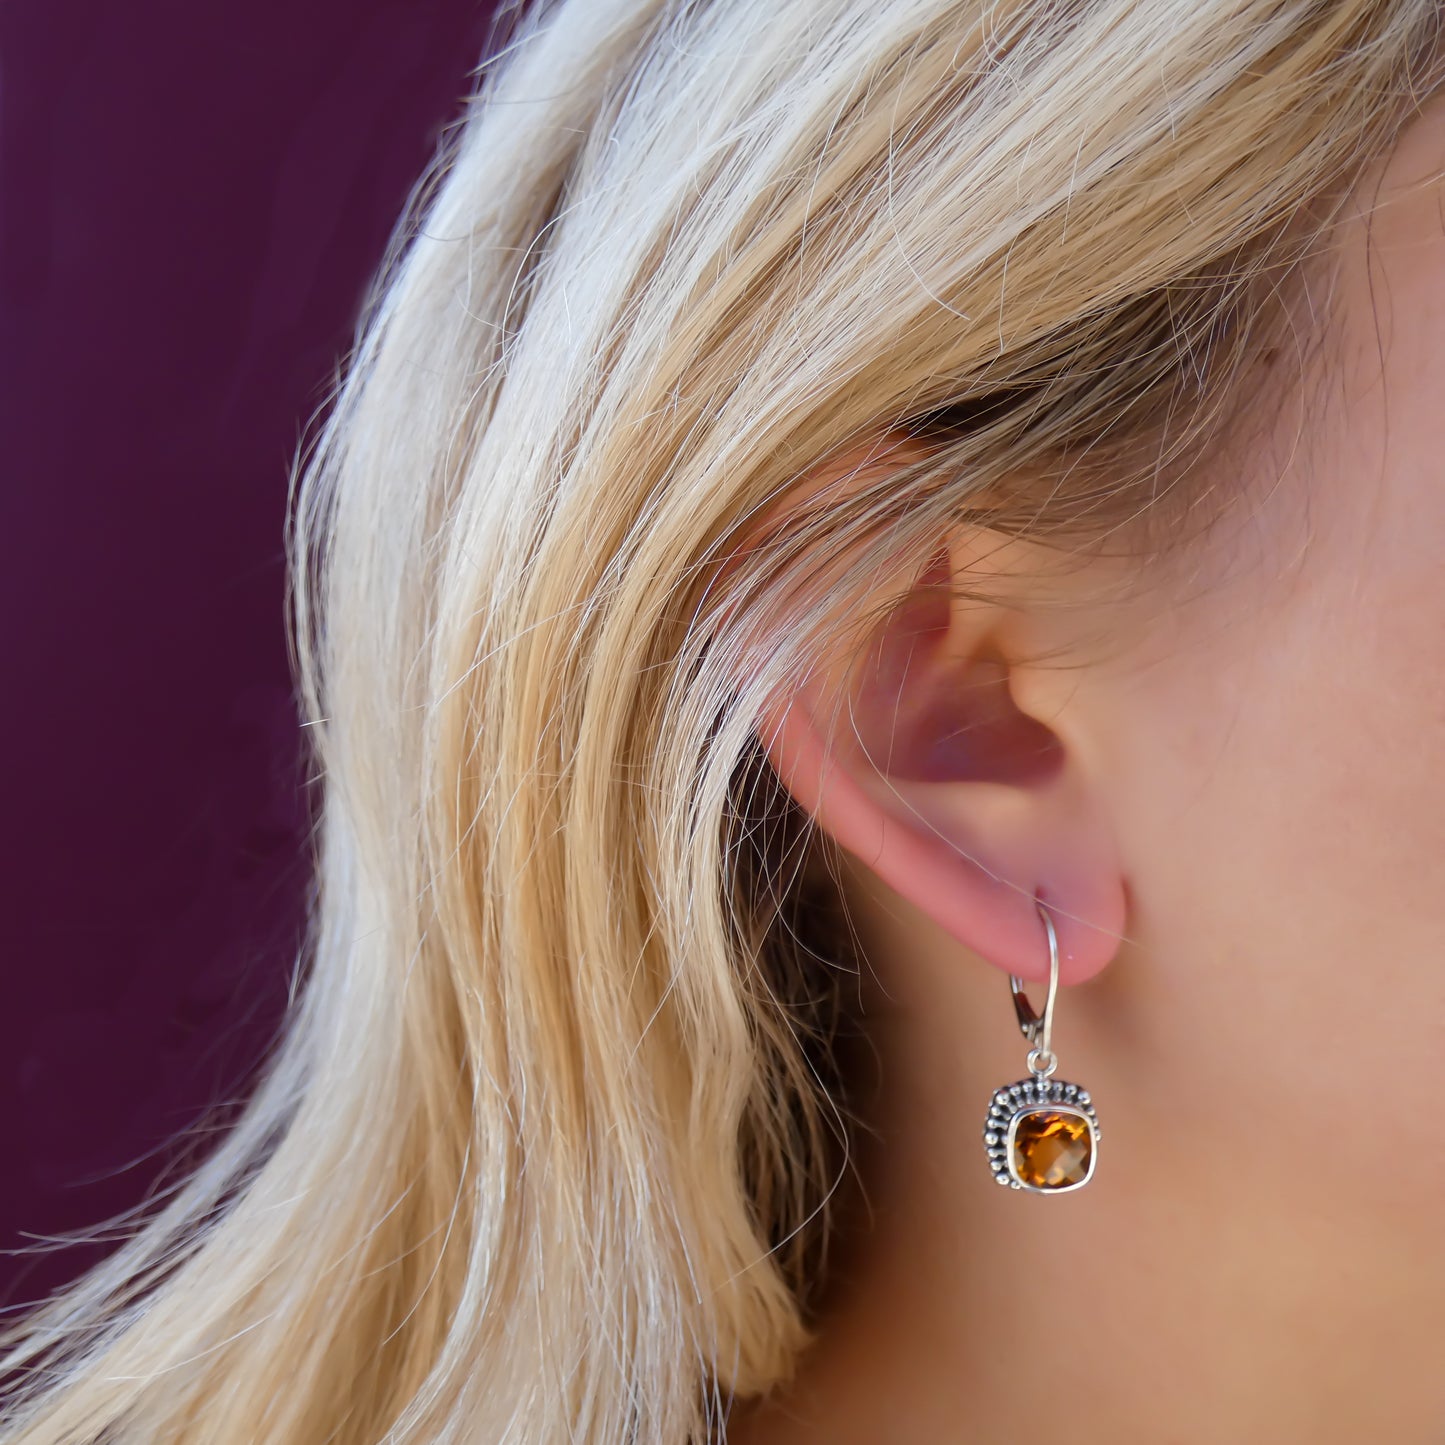 Woman wearing silver earrings with square citrine gemstones.